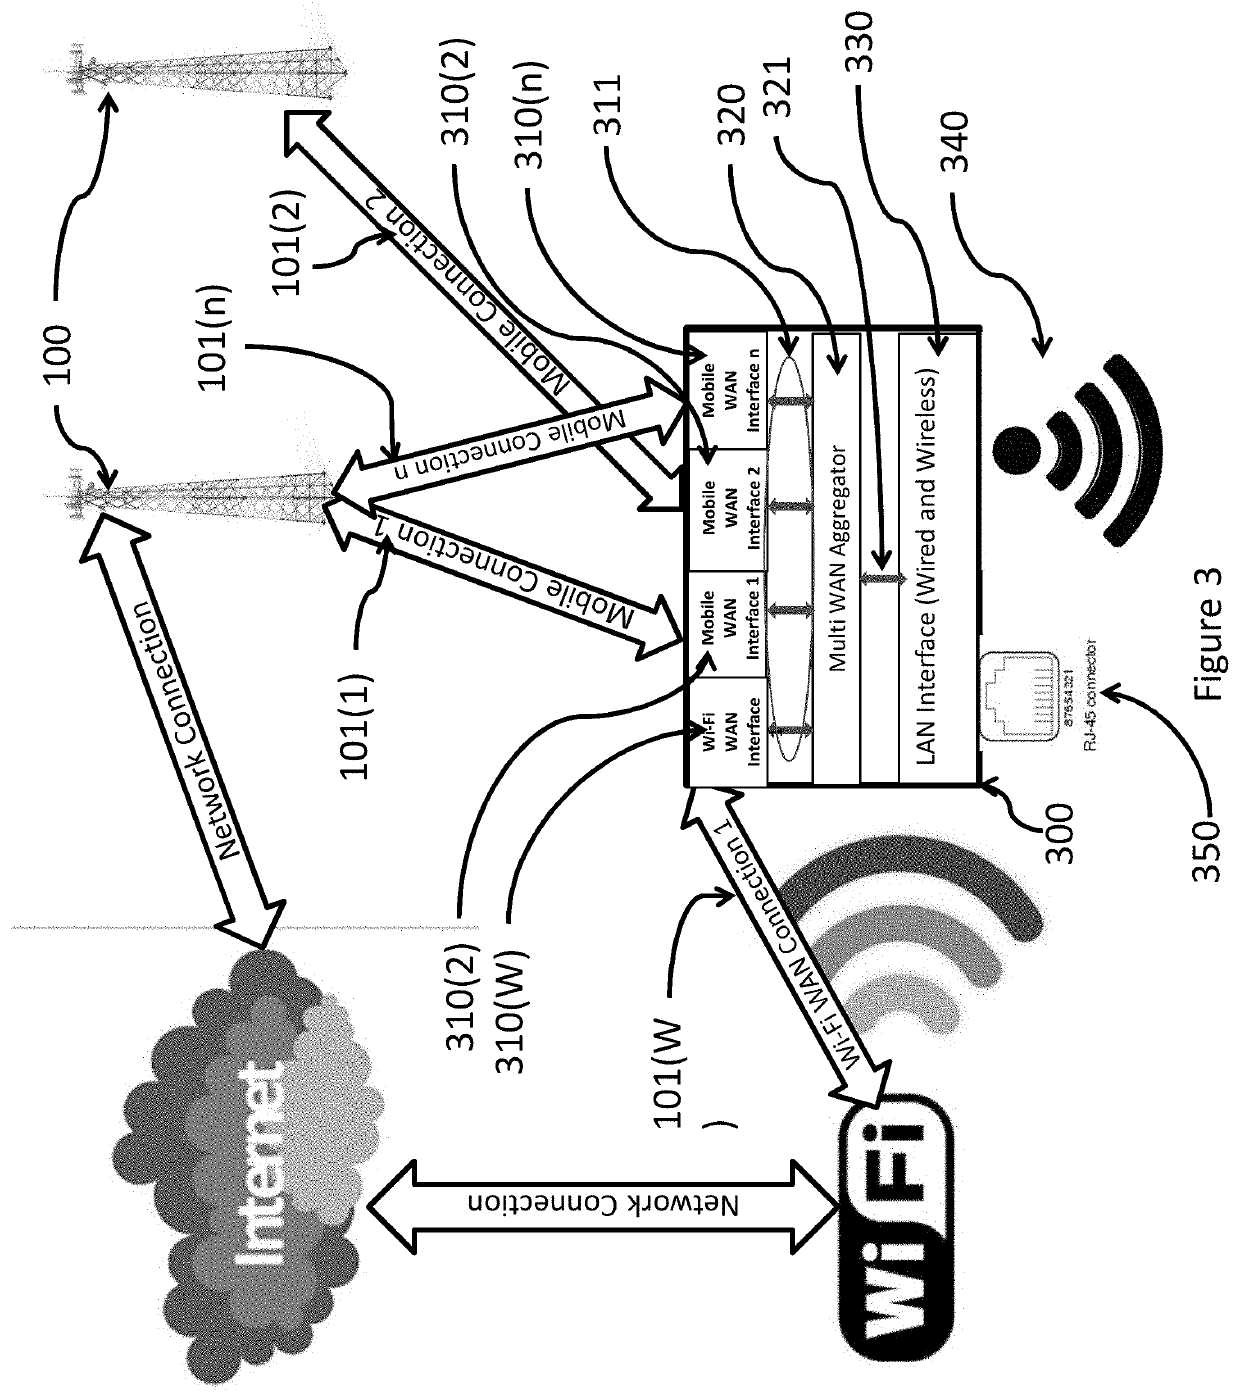 Systems and methods for performing data aggregation in wide area networks